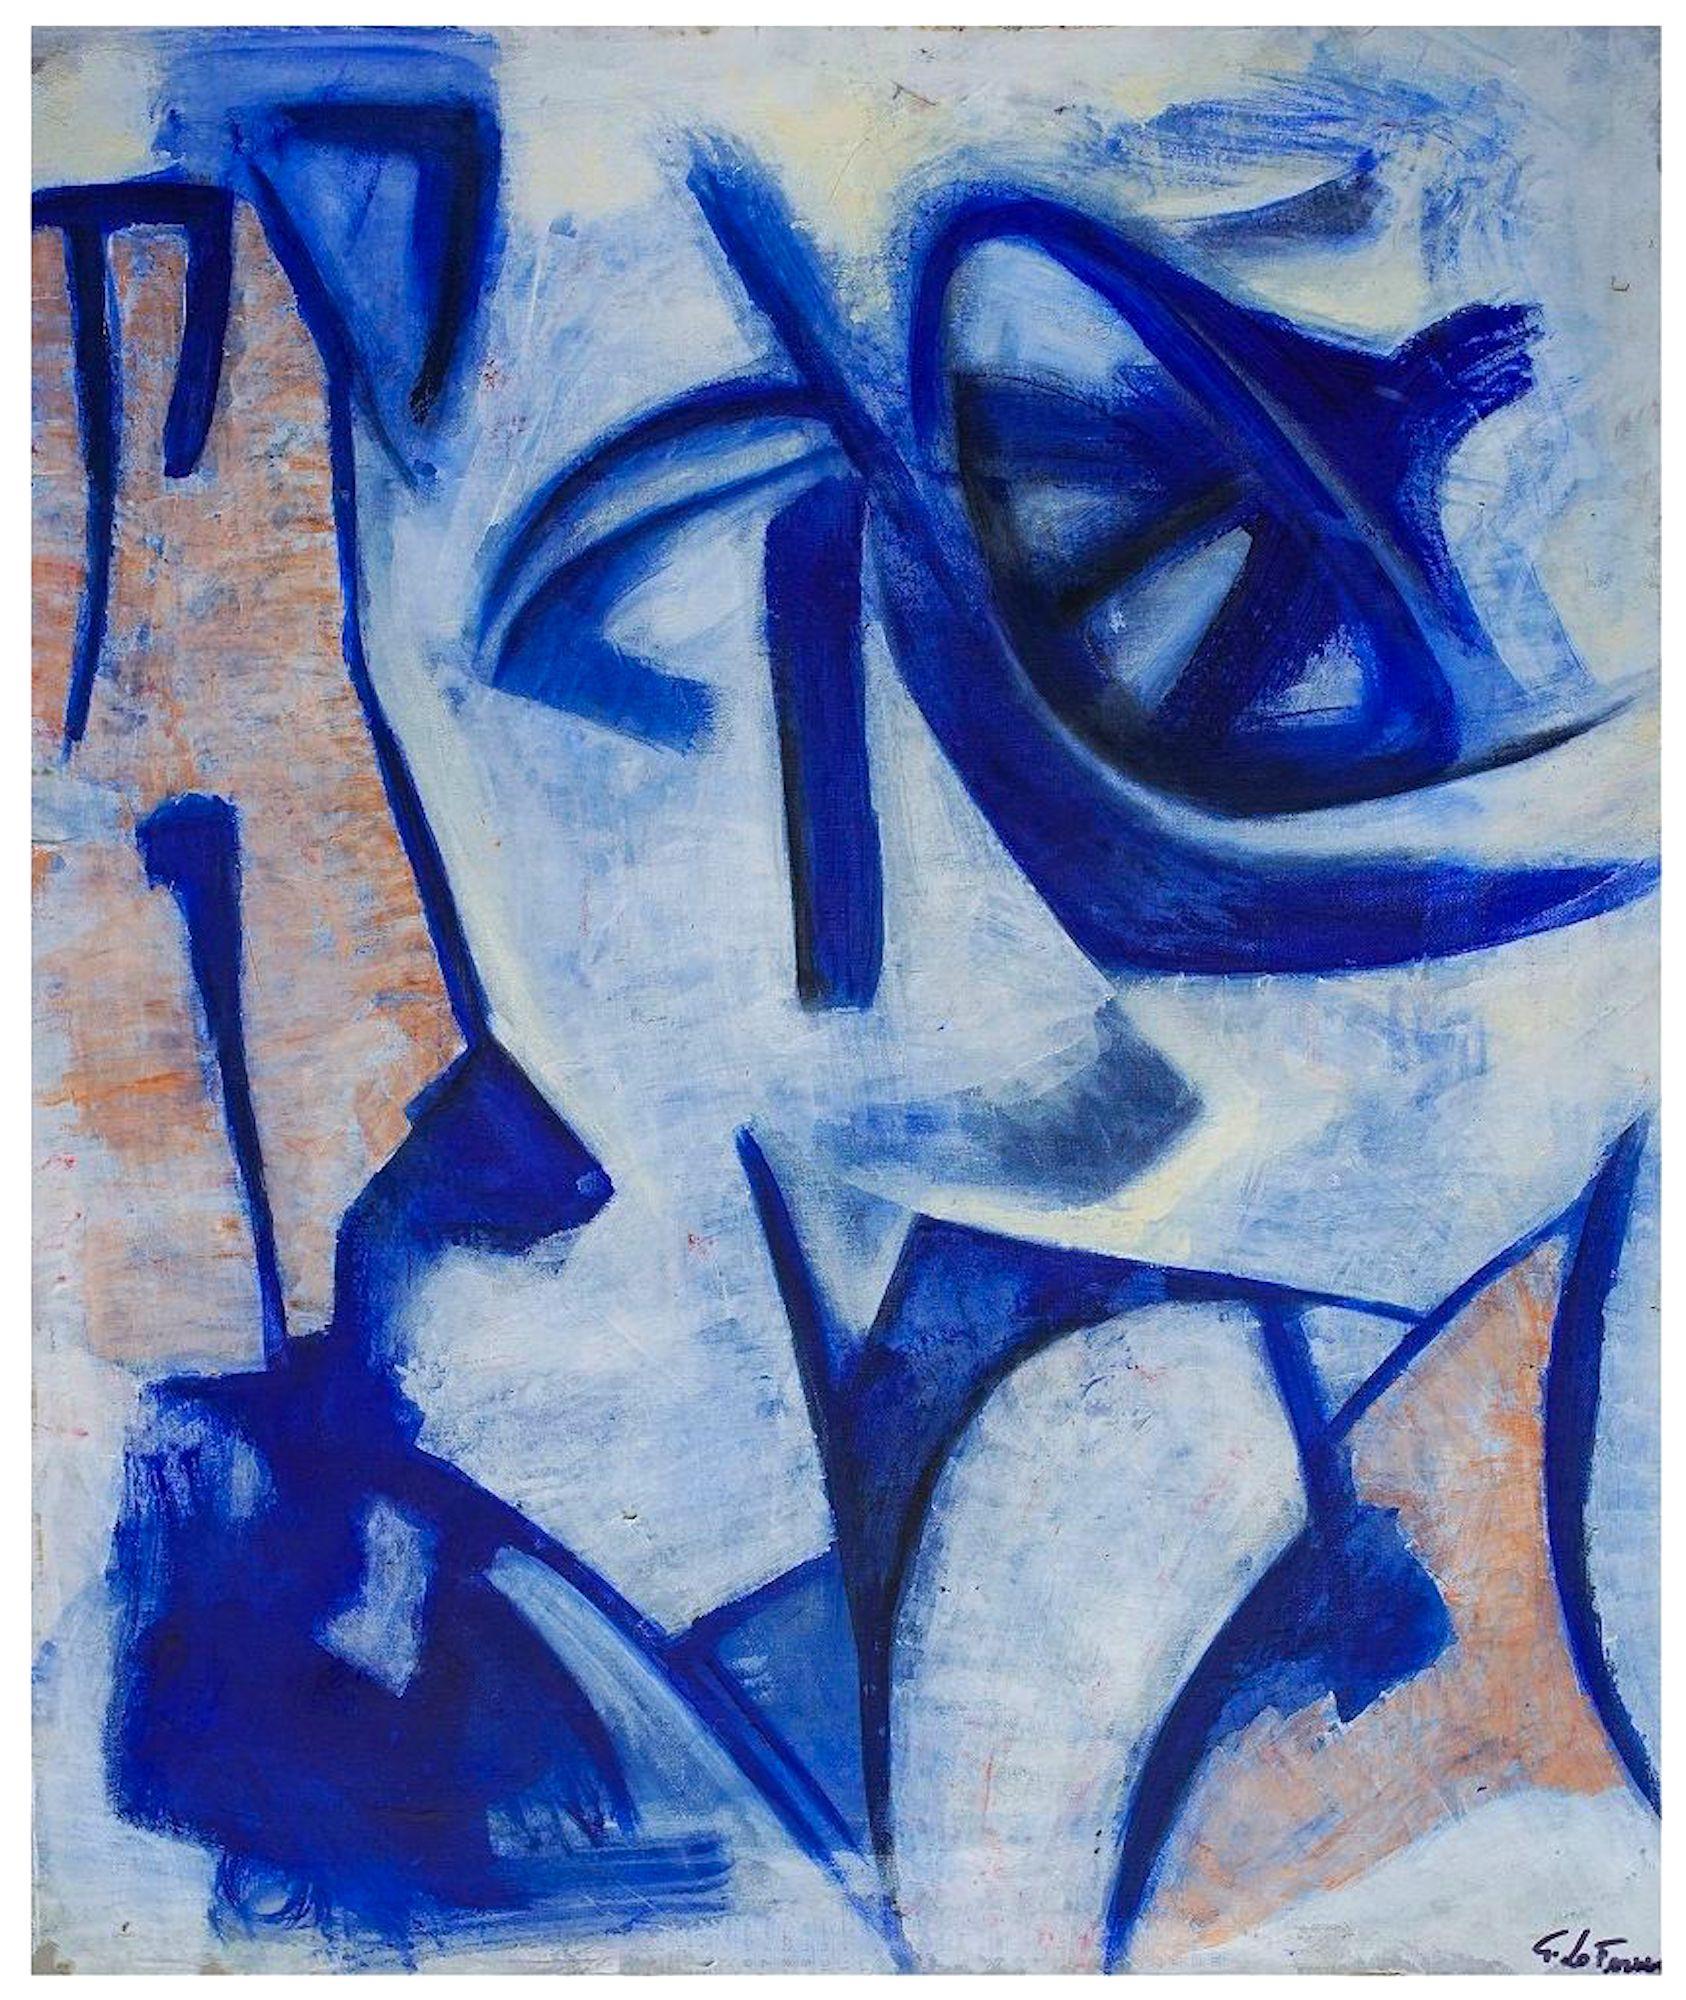 Giorgio Lo Fermo Abstract Painting - Untitled - Post Cubism - Oil Painting 2015